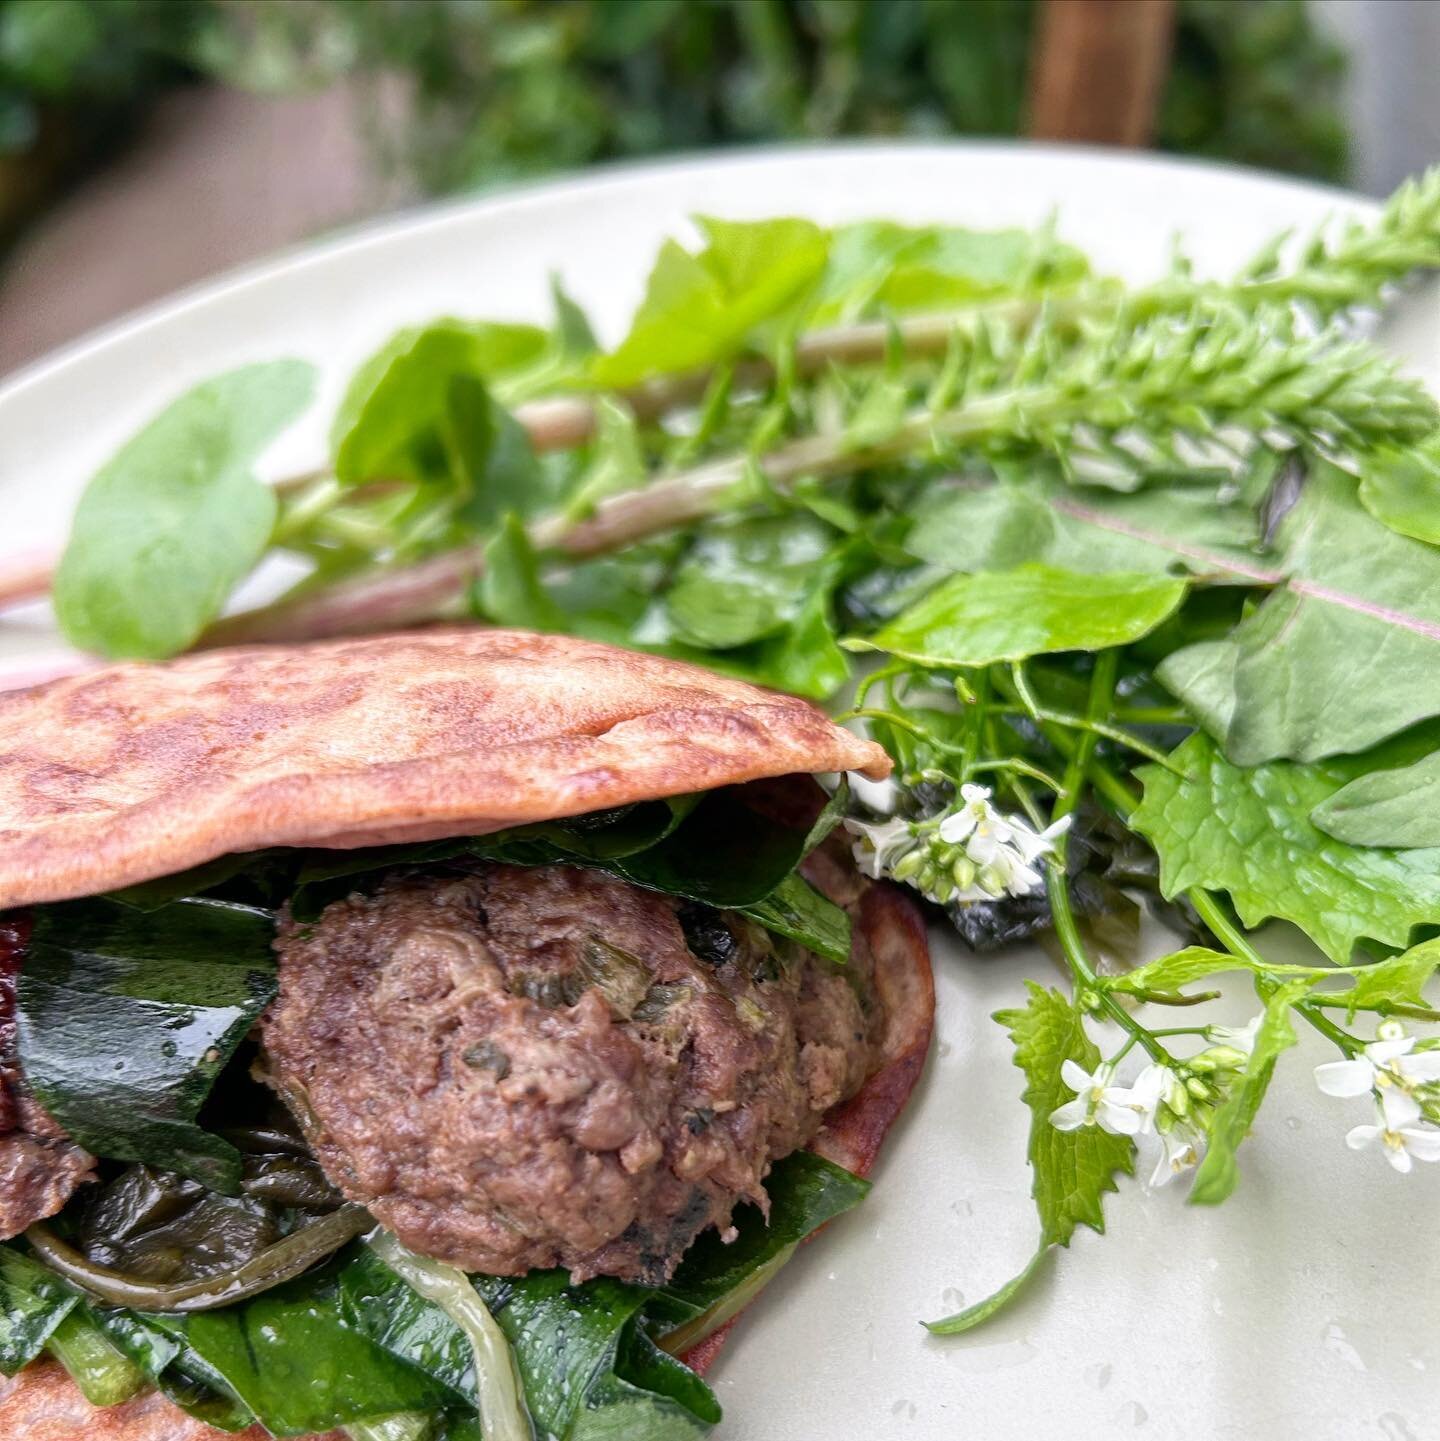 Day 8 @wildbiomeproject 

I made burgers 🍔 

Kind of burgers, I mean they would be perfect burgers if I was allowed a bun, but had to cope without 
🍔
I used mix of minced venison and wild lamb and the patties were amazing! So tasty, not dry at all 